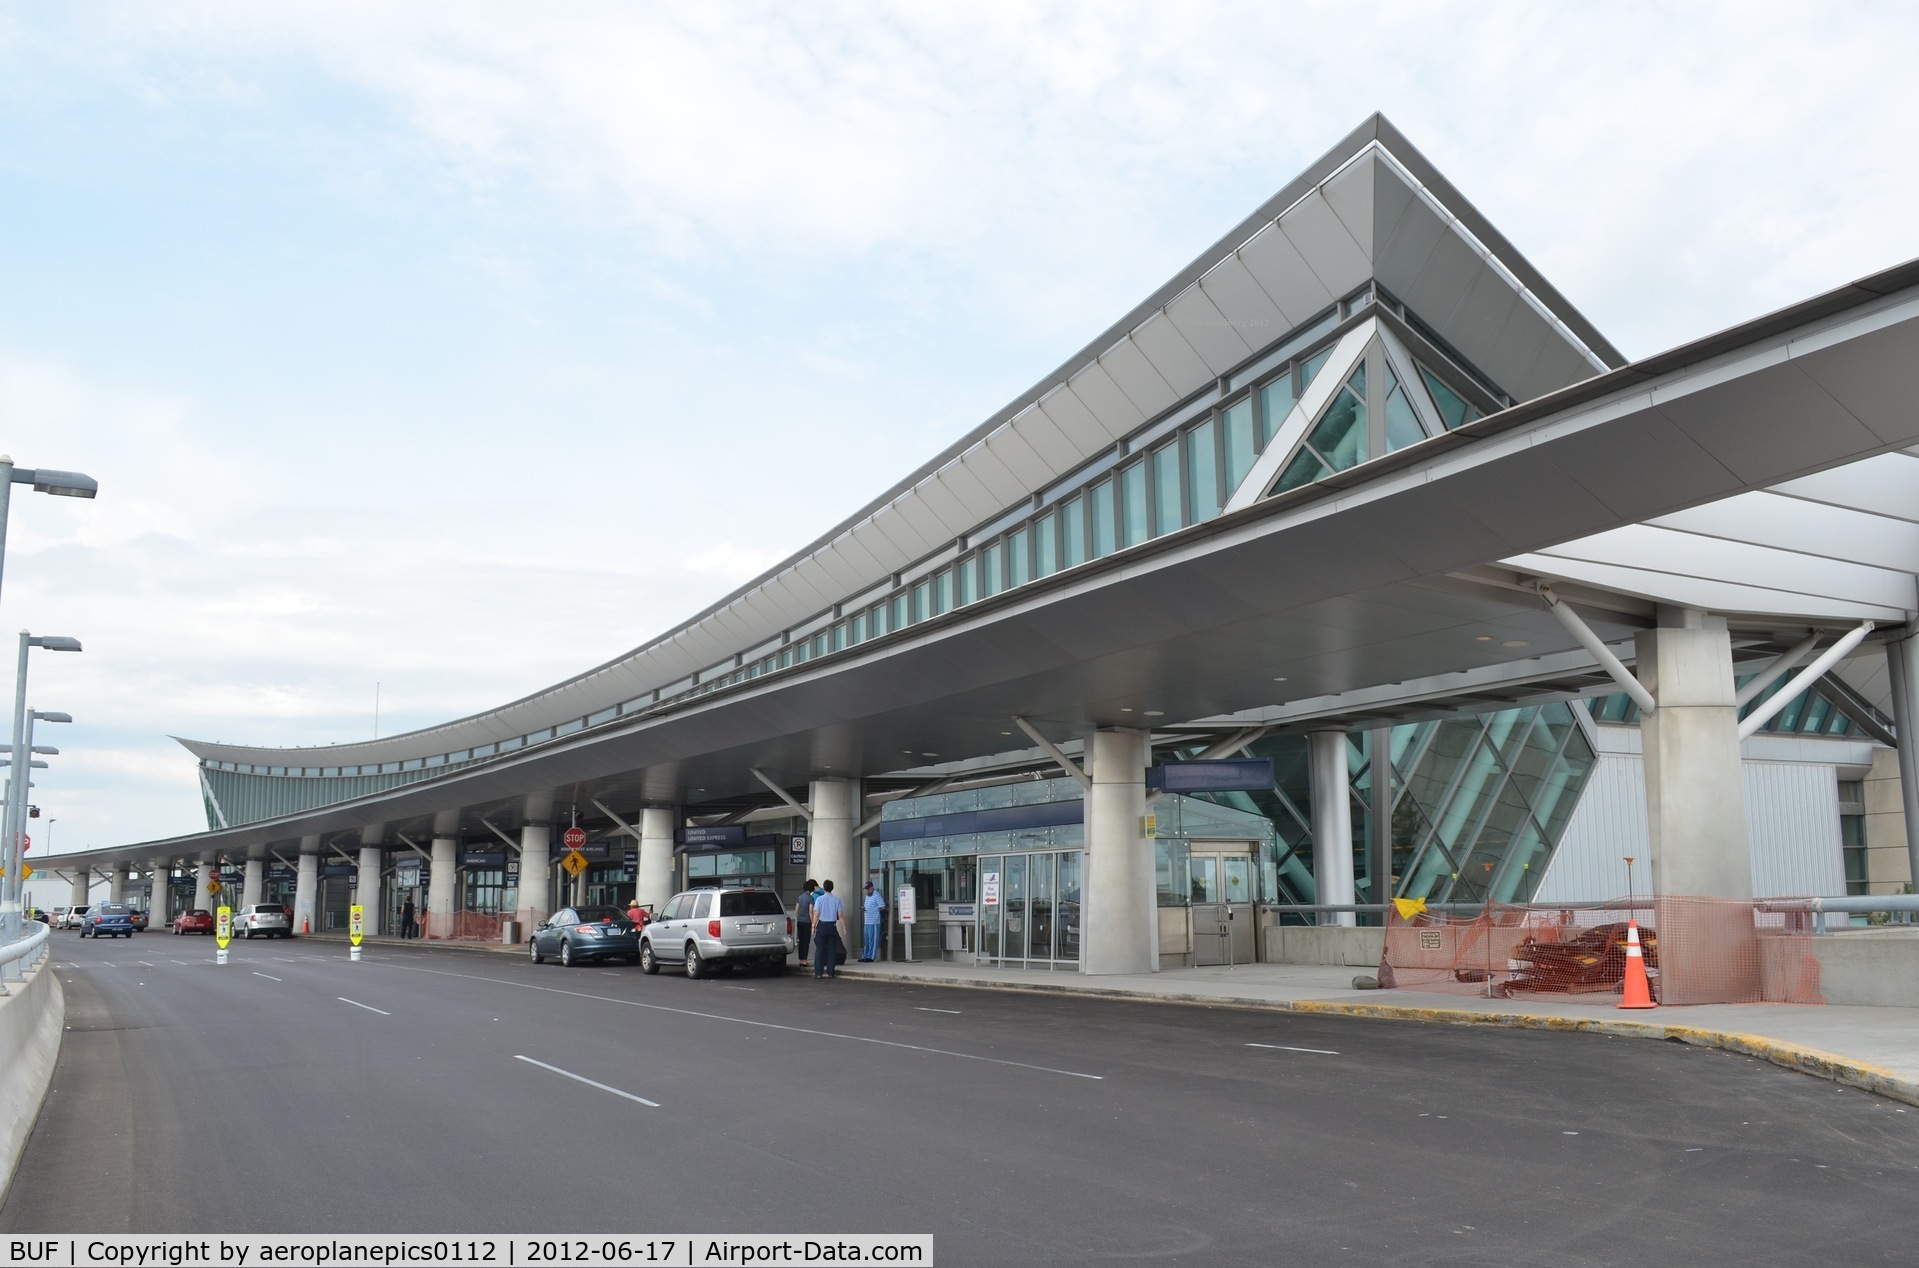 Buffalo Niagara International Airport (BUF) - A view of the Arrivals section of the Arrivals and Departures hall at Buffalo Niagara International Airport. 